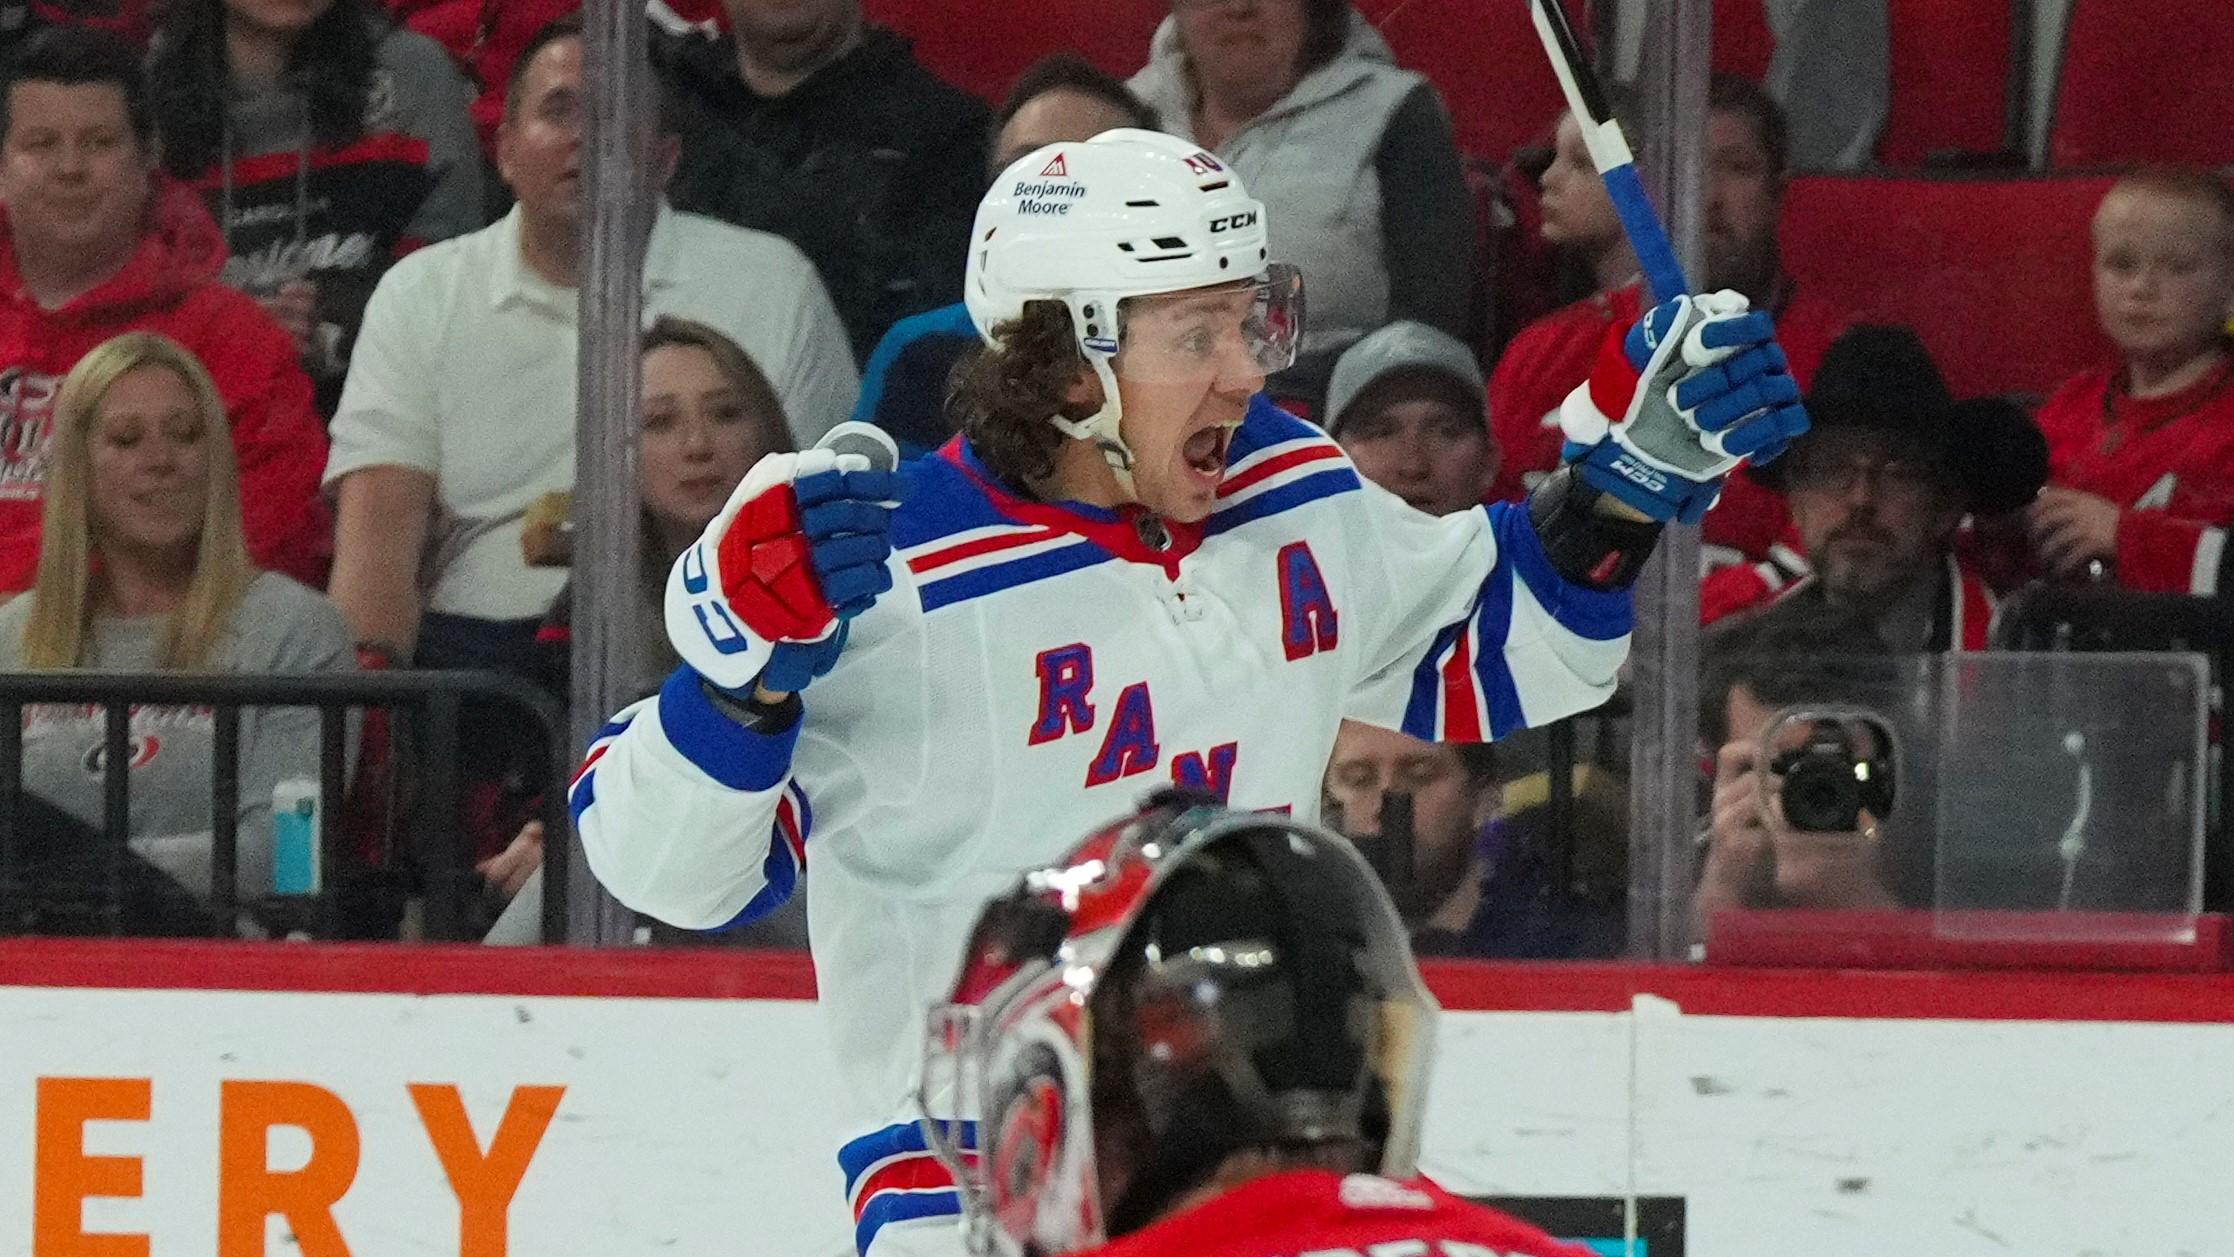 Mar 23, 2023; Raleigh, North Carolina, USA; New York Rangers left wing Artemi Panarin (10) celebrates his goal against the Carolina Hurricanes during the second period at PNC Arena. Mandatory Credit: James Guillory-USA TODAY Sports / © James Guillory-USA TODAY Sports